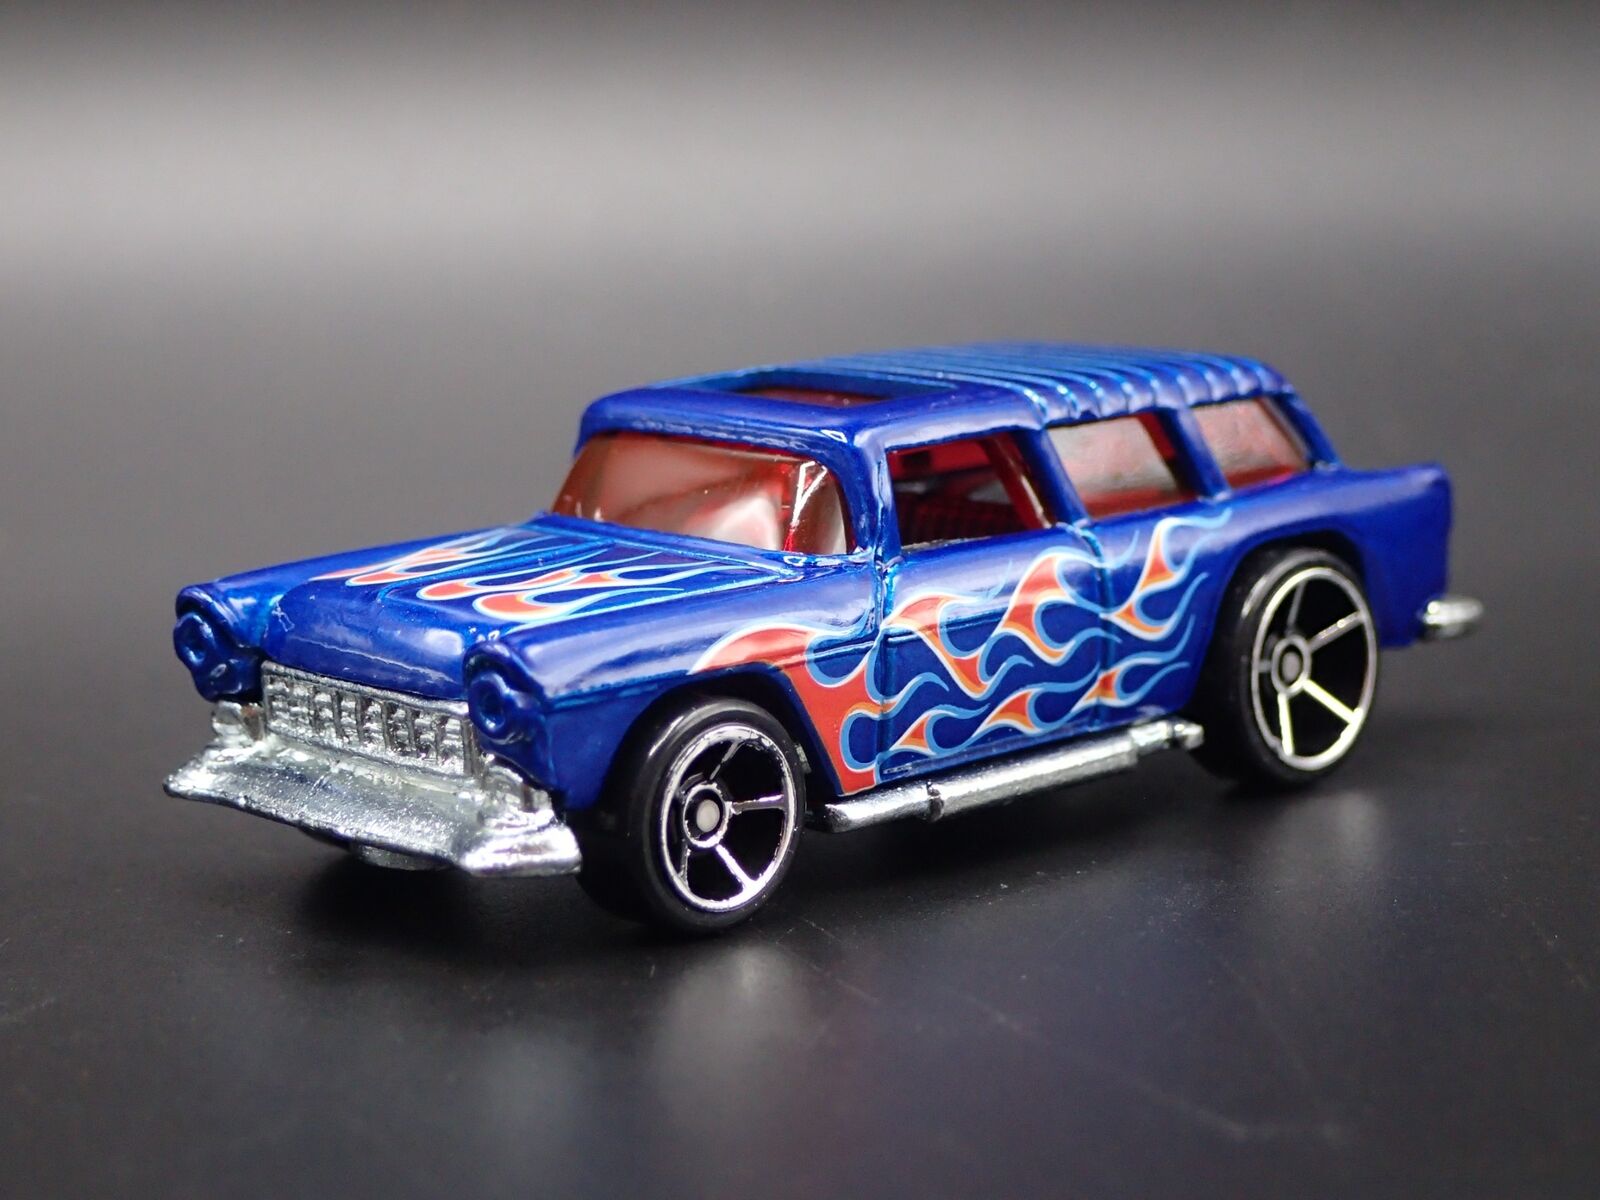 1955 55 CHEVY CHEVROLET NOMAD STATION WAGON RARE 1:64 SCALE DIECAST MODEL CAR